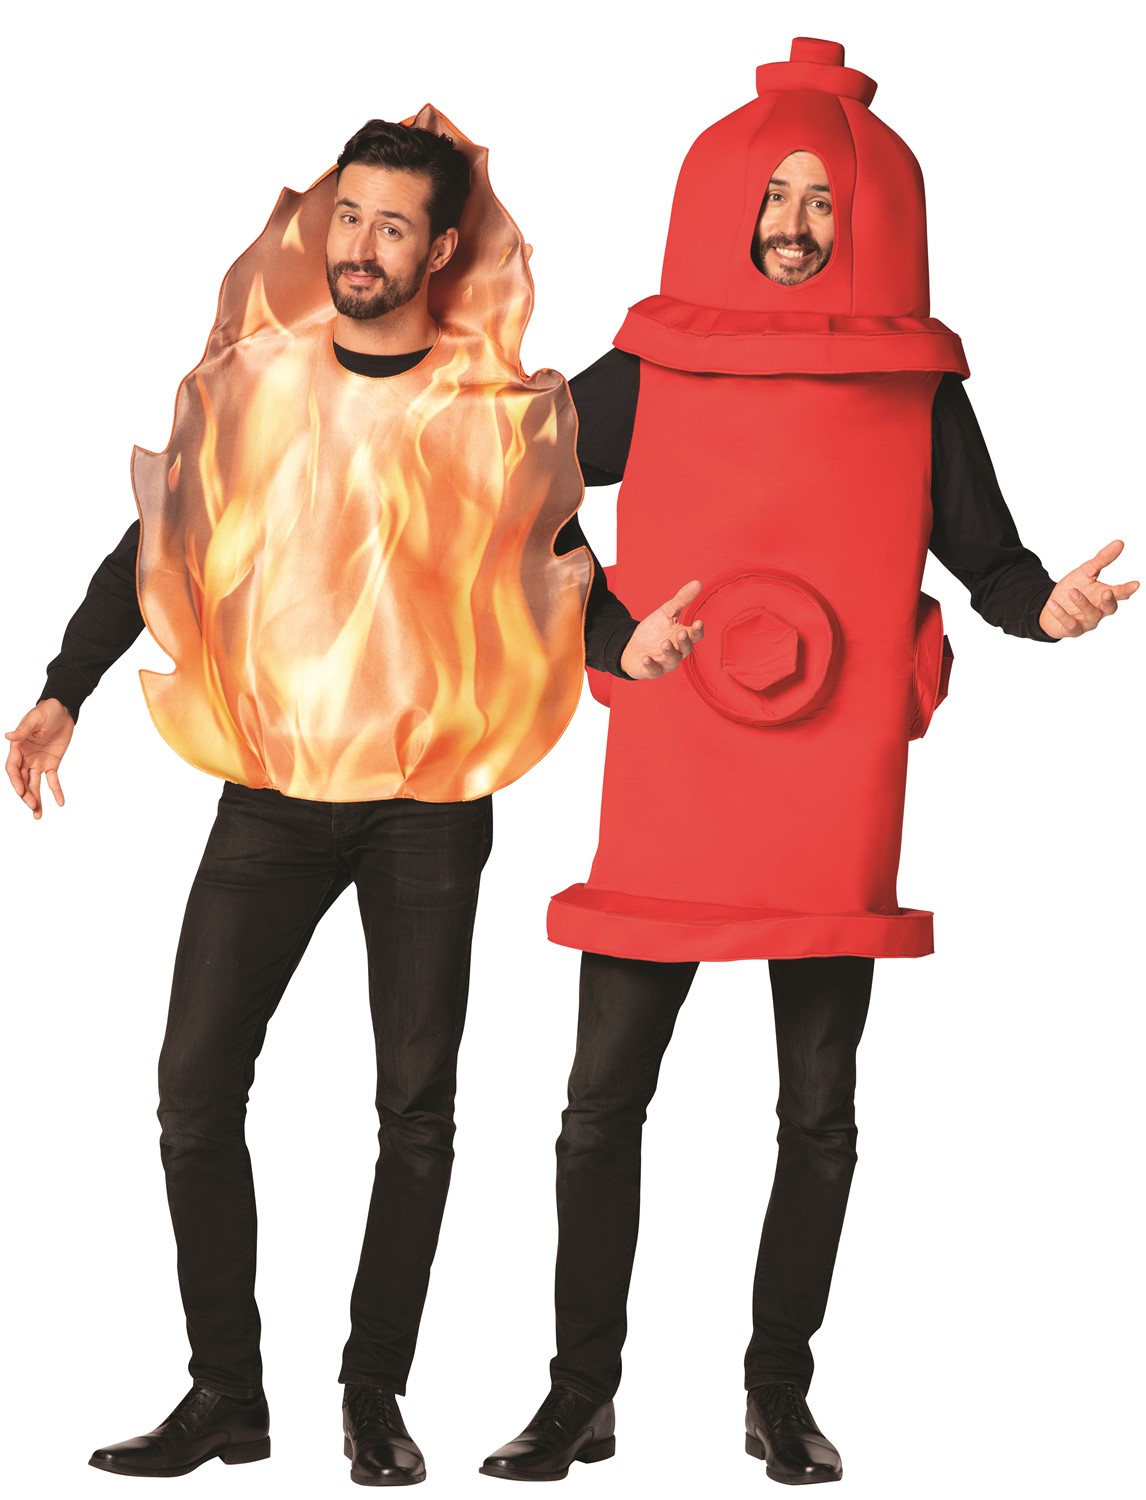 It's Hot Flaming Fire & Hydrant Couples Halloween Costume, Adult One Size